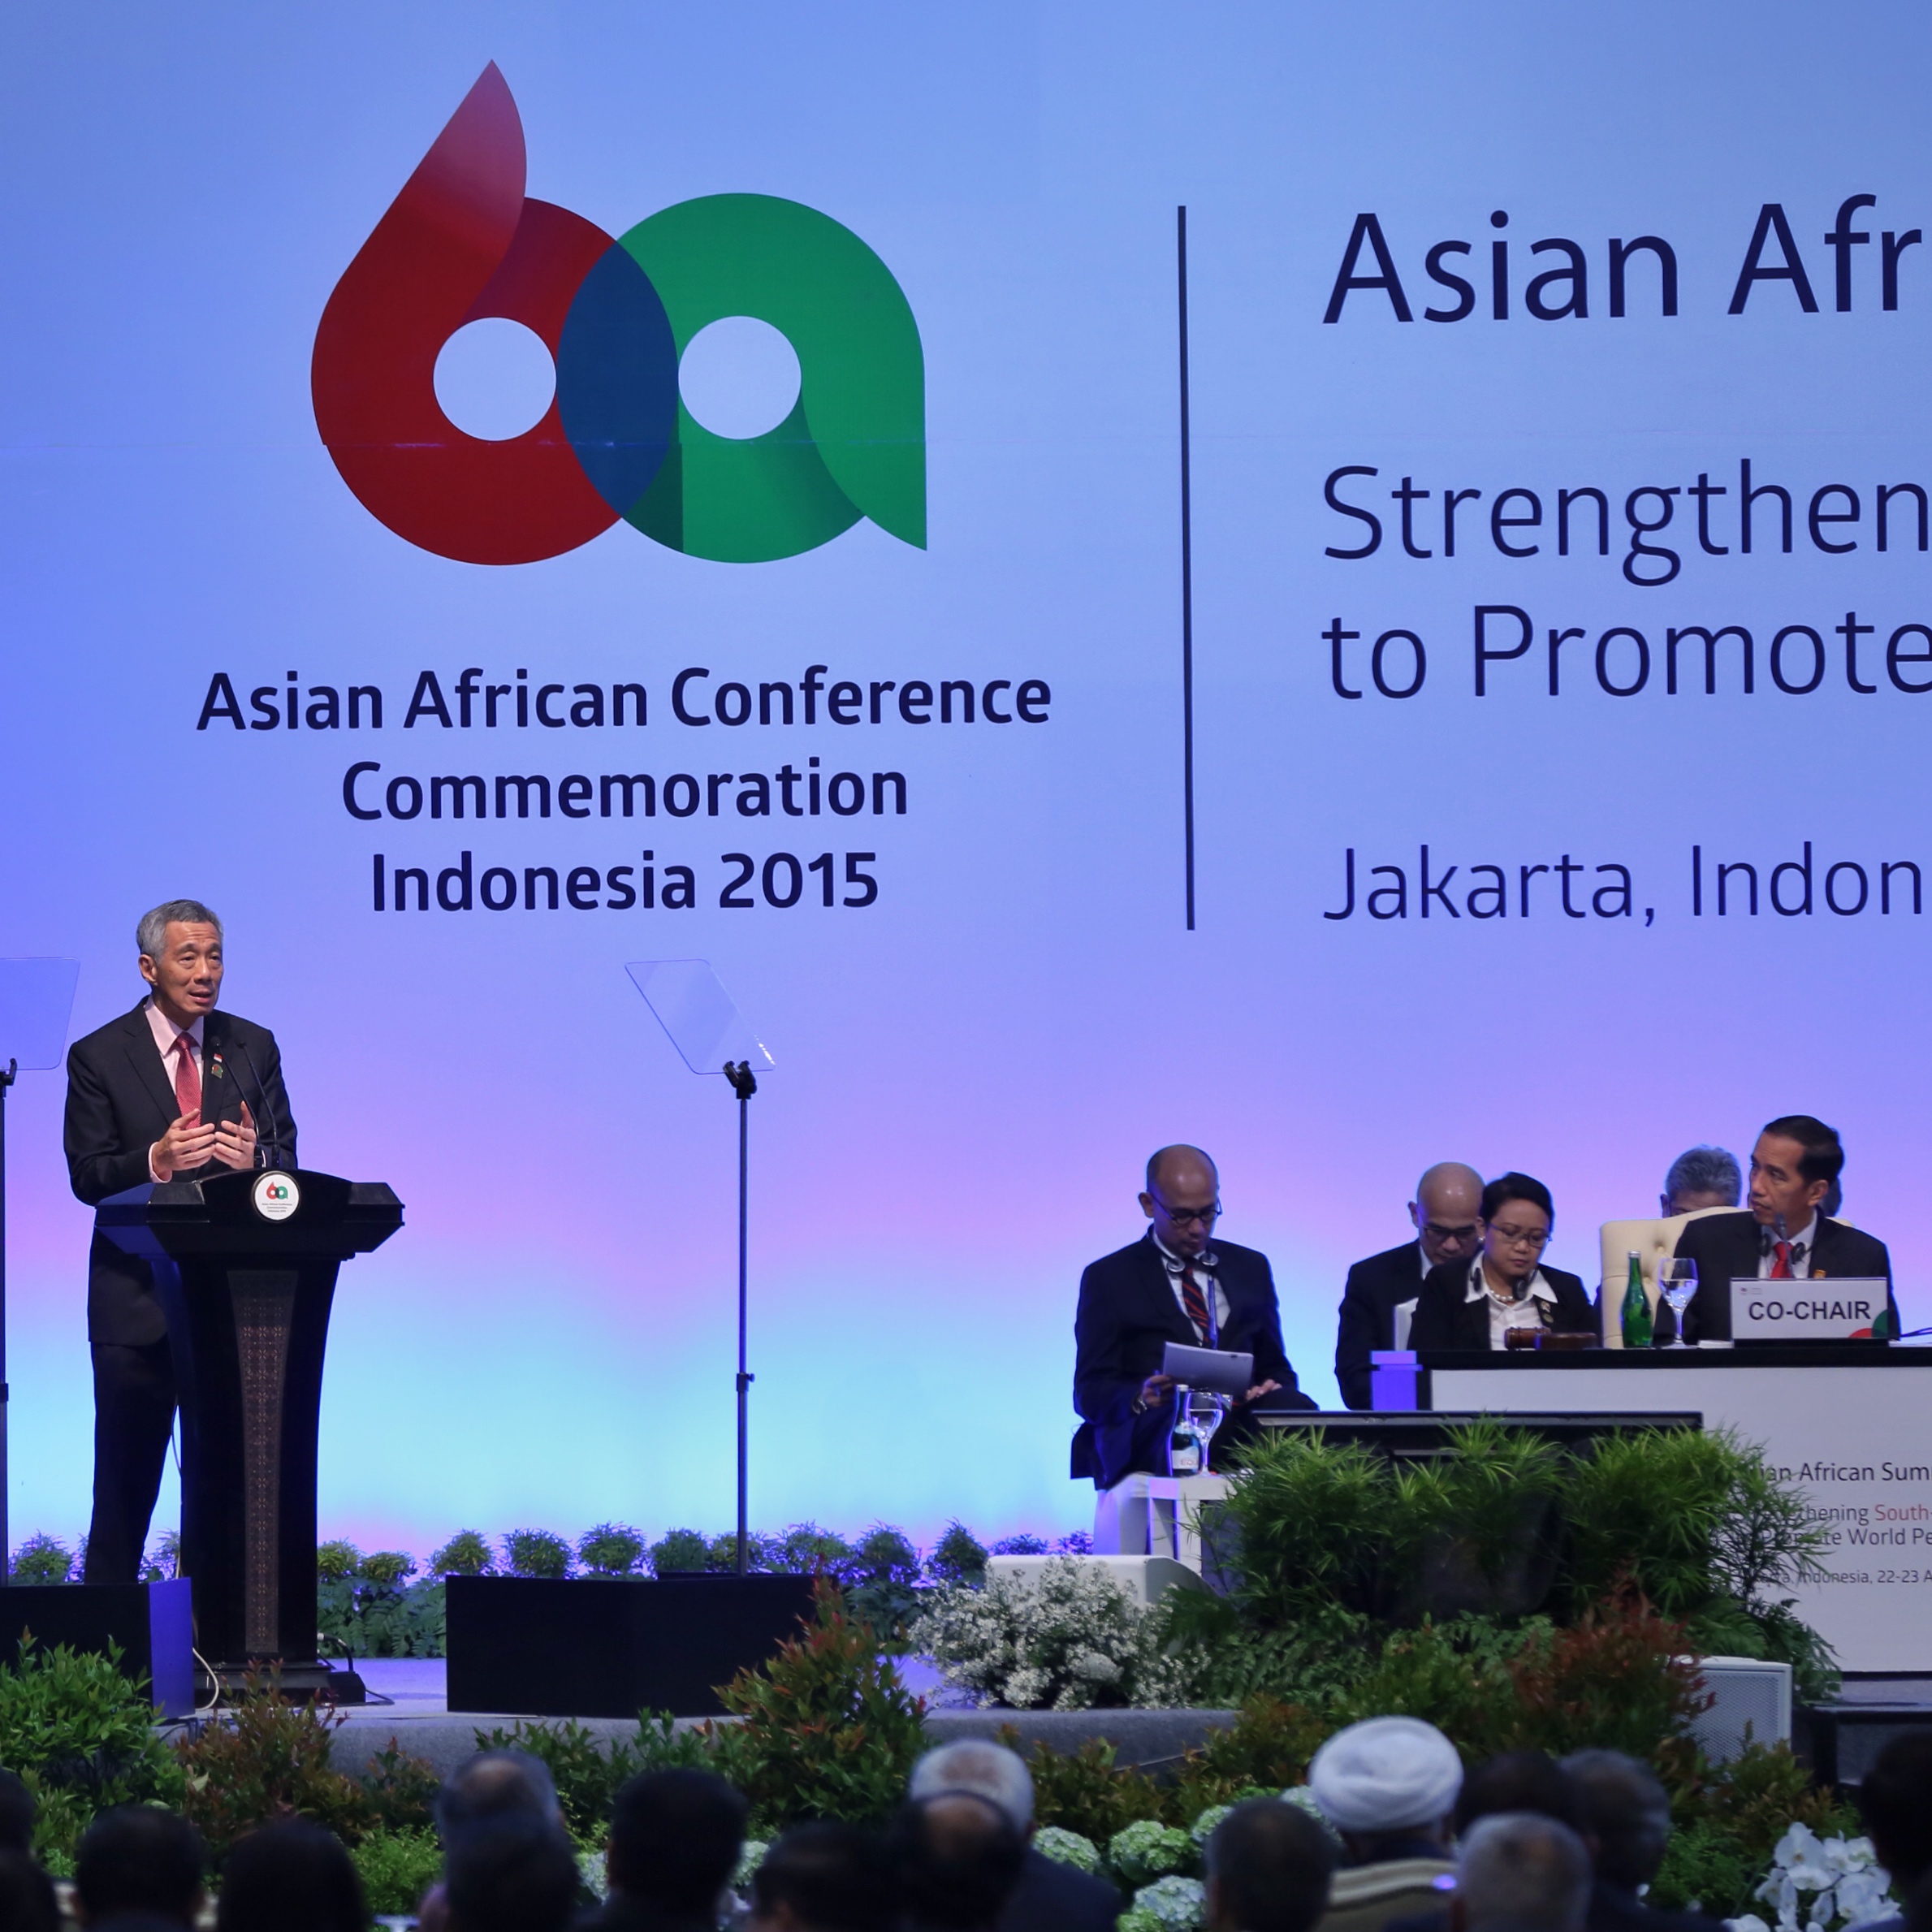 Prime Minister Lee Hsien Loong speaks at the Asian-African Summit in Jakarta, Indonesia, on 22 April 2015.